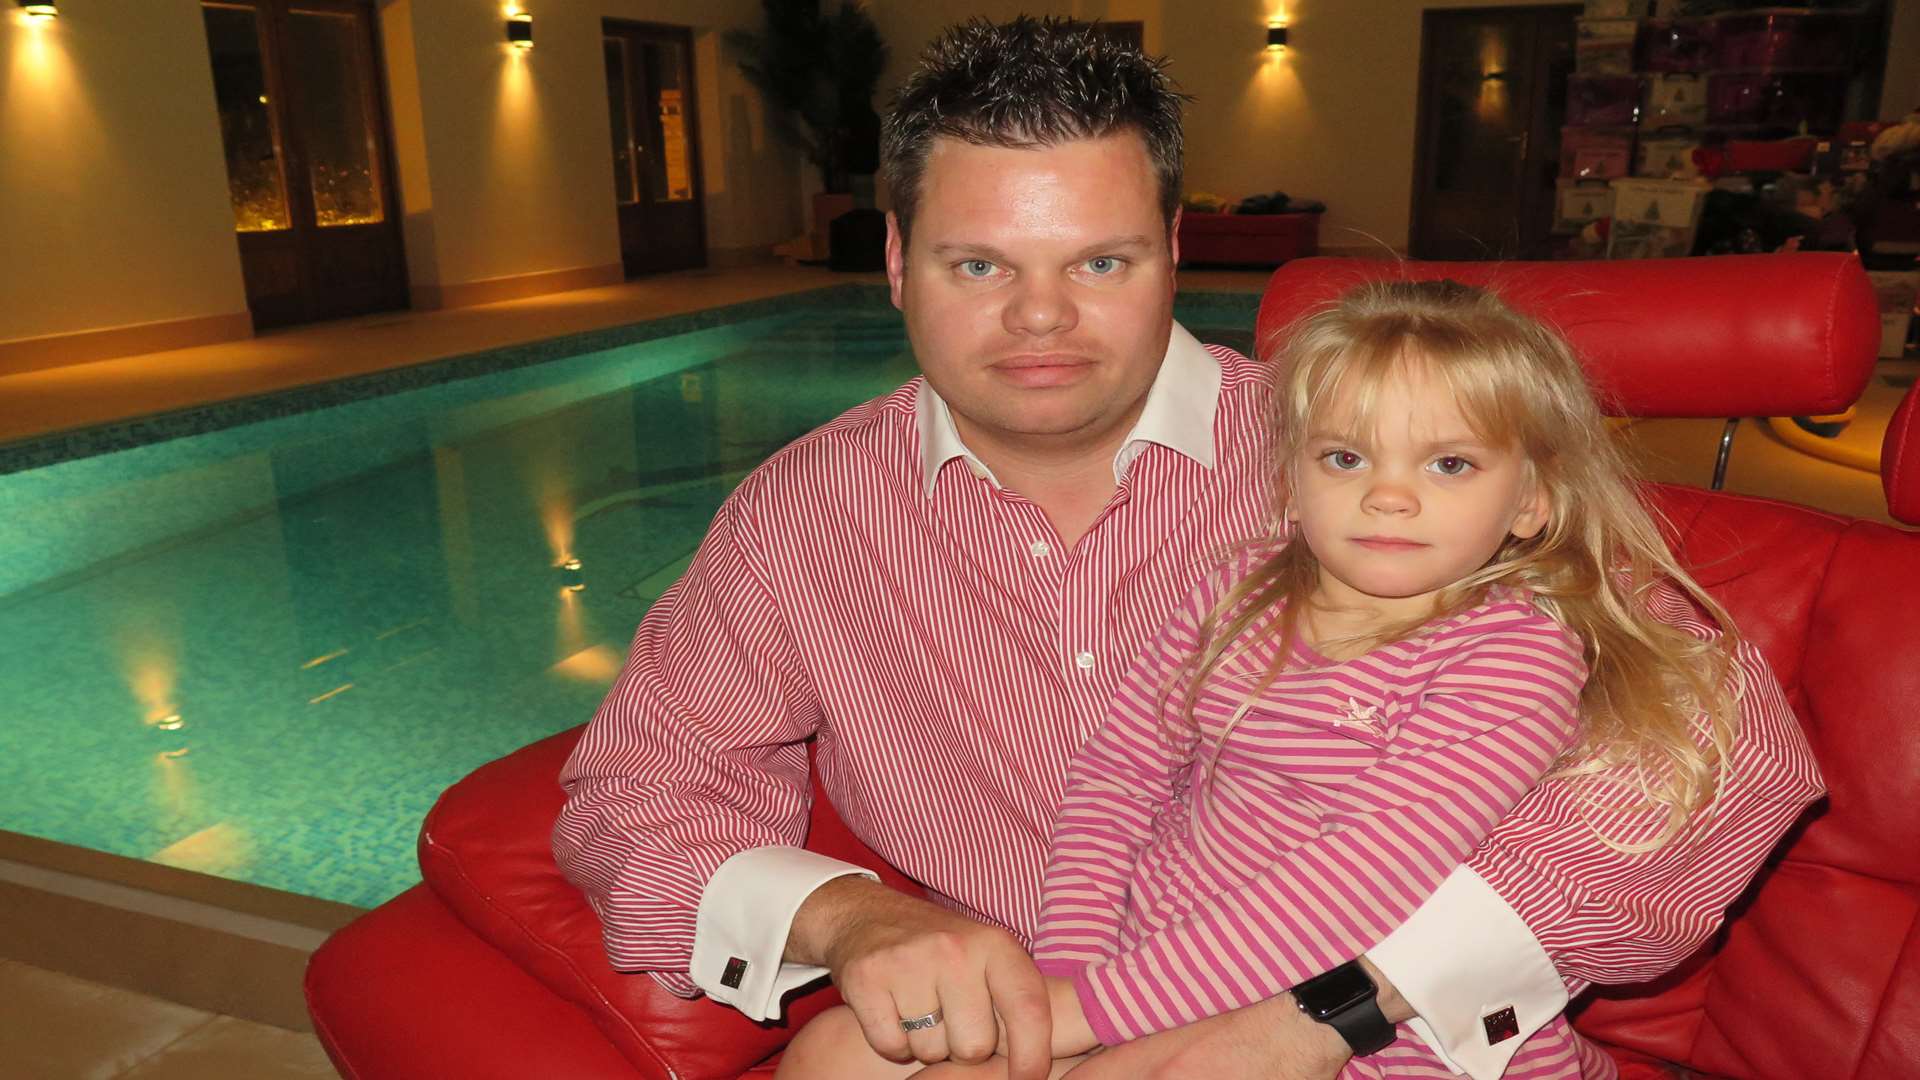 Ian Thomas with his daughter Jacinta, 4, who almost drowned